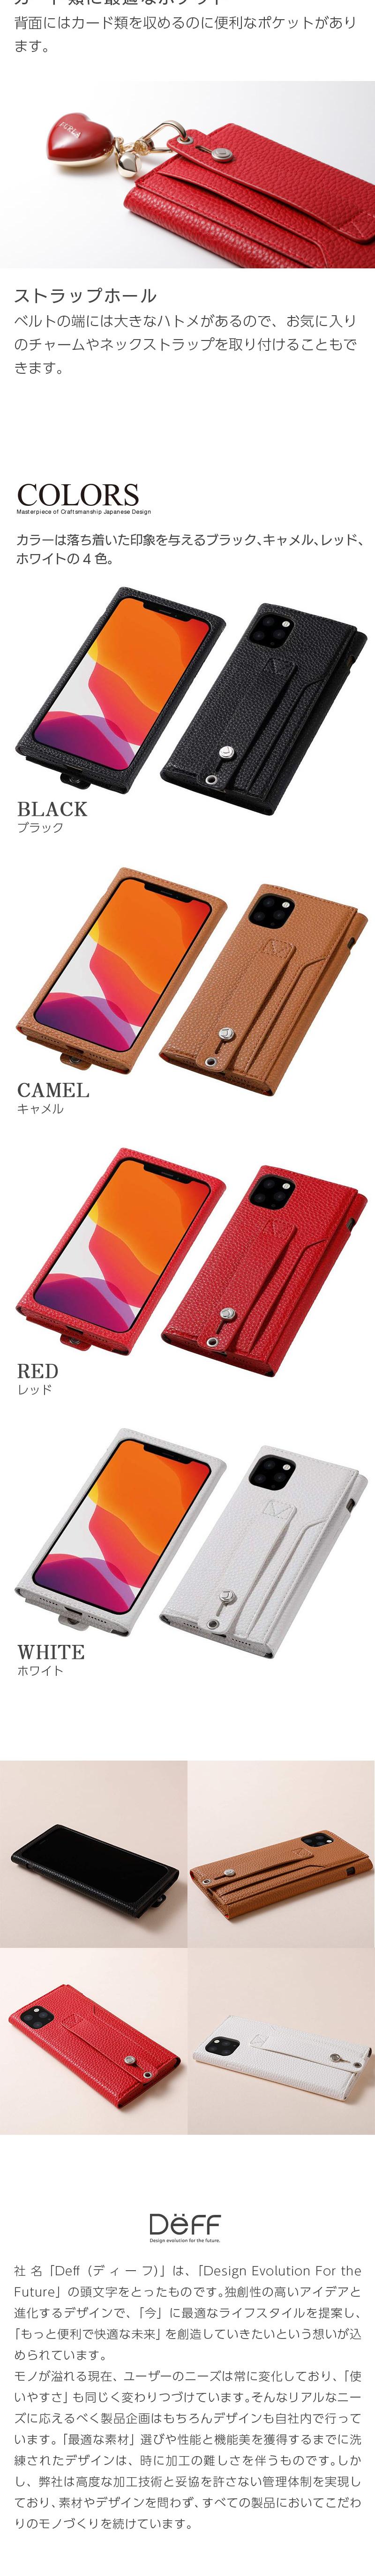 Deff clings Slim Hand Strap Case』 iPhone 11 Pro ケース レザー 